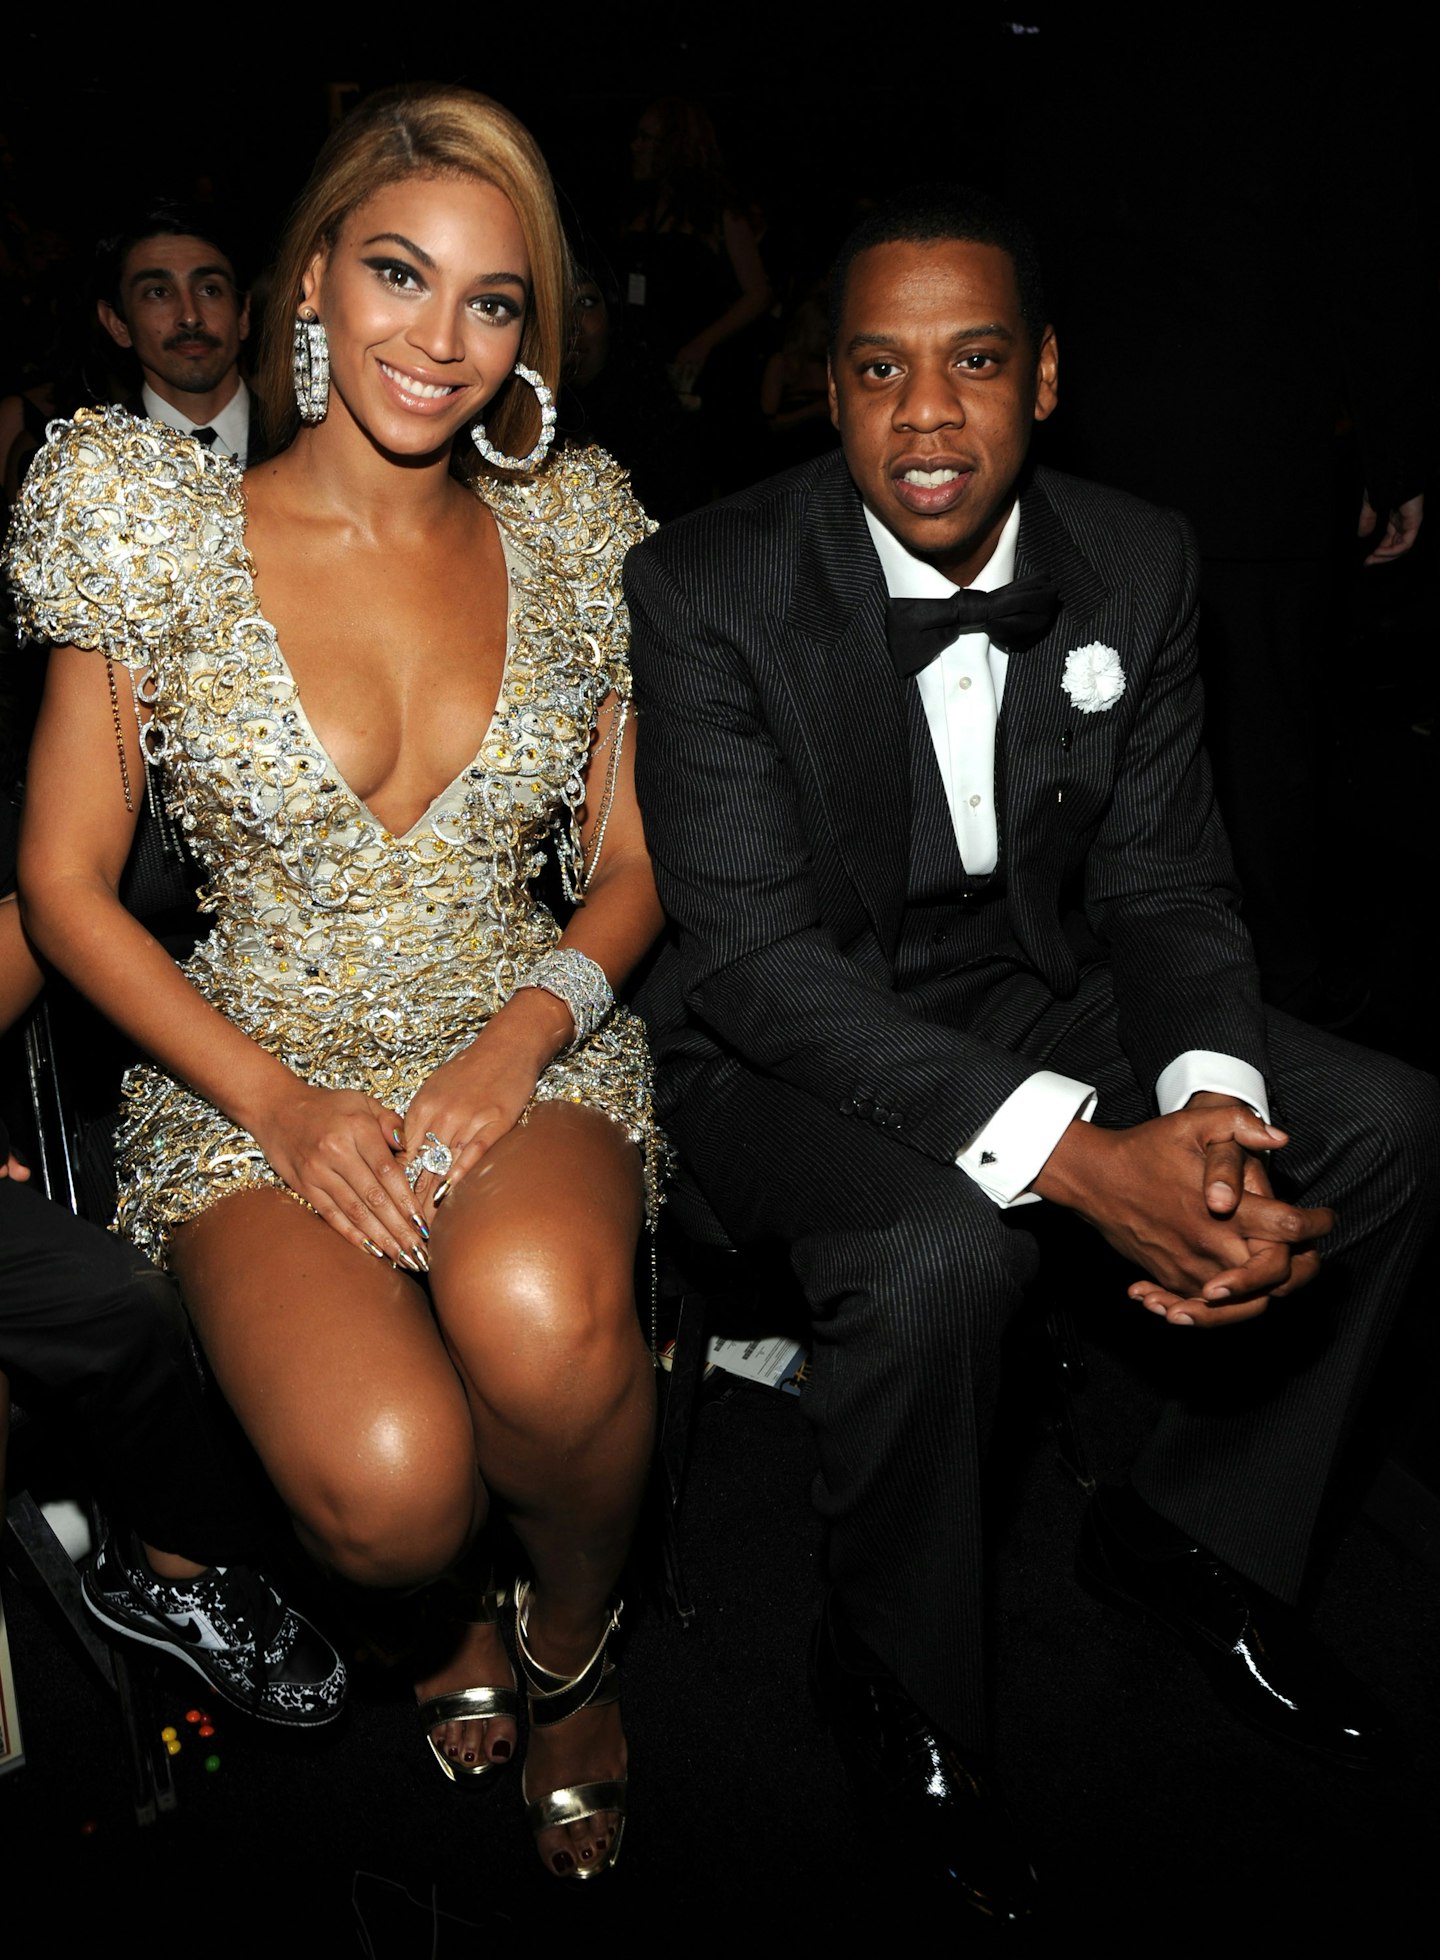 Beyonce and Jay-Z attends the 52nd Annual GRAMMY Awards held at Staples Center on January 31, 2010 in LA